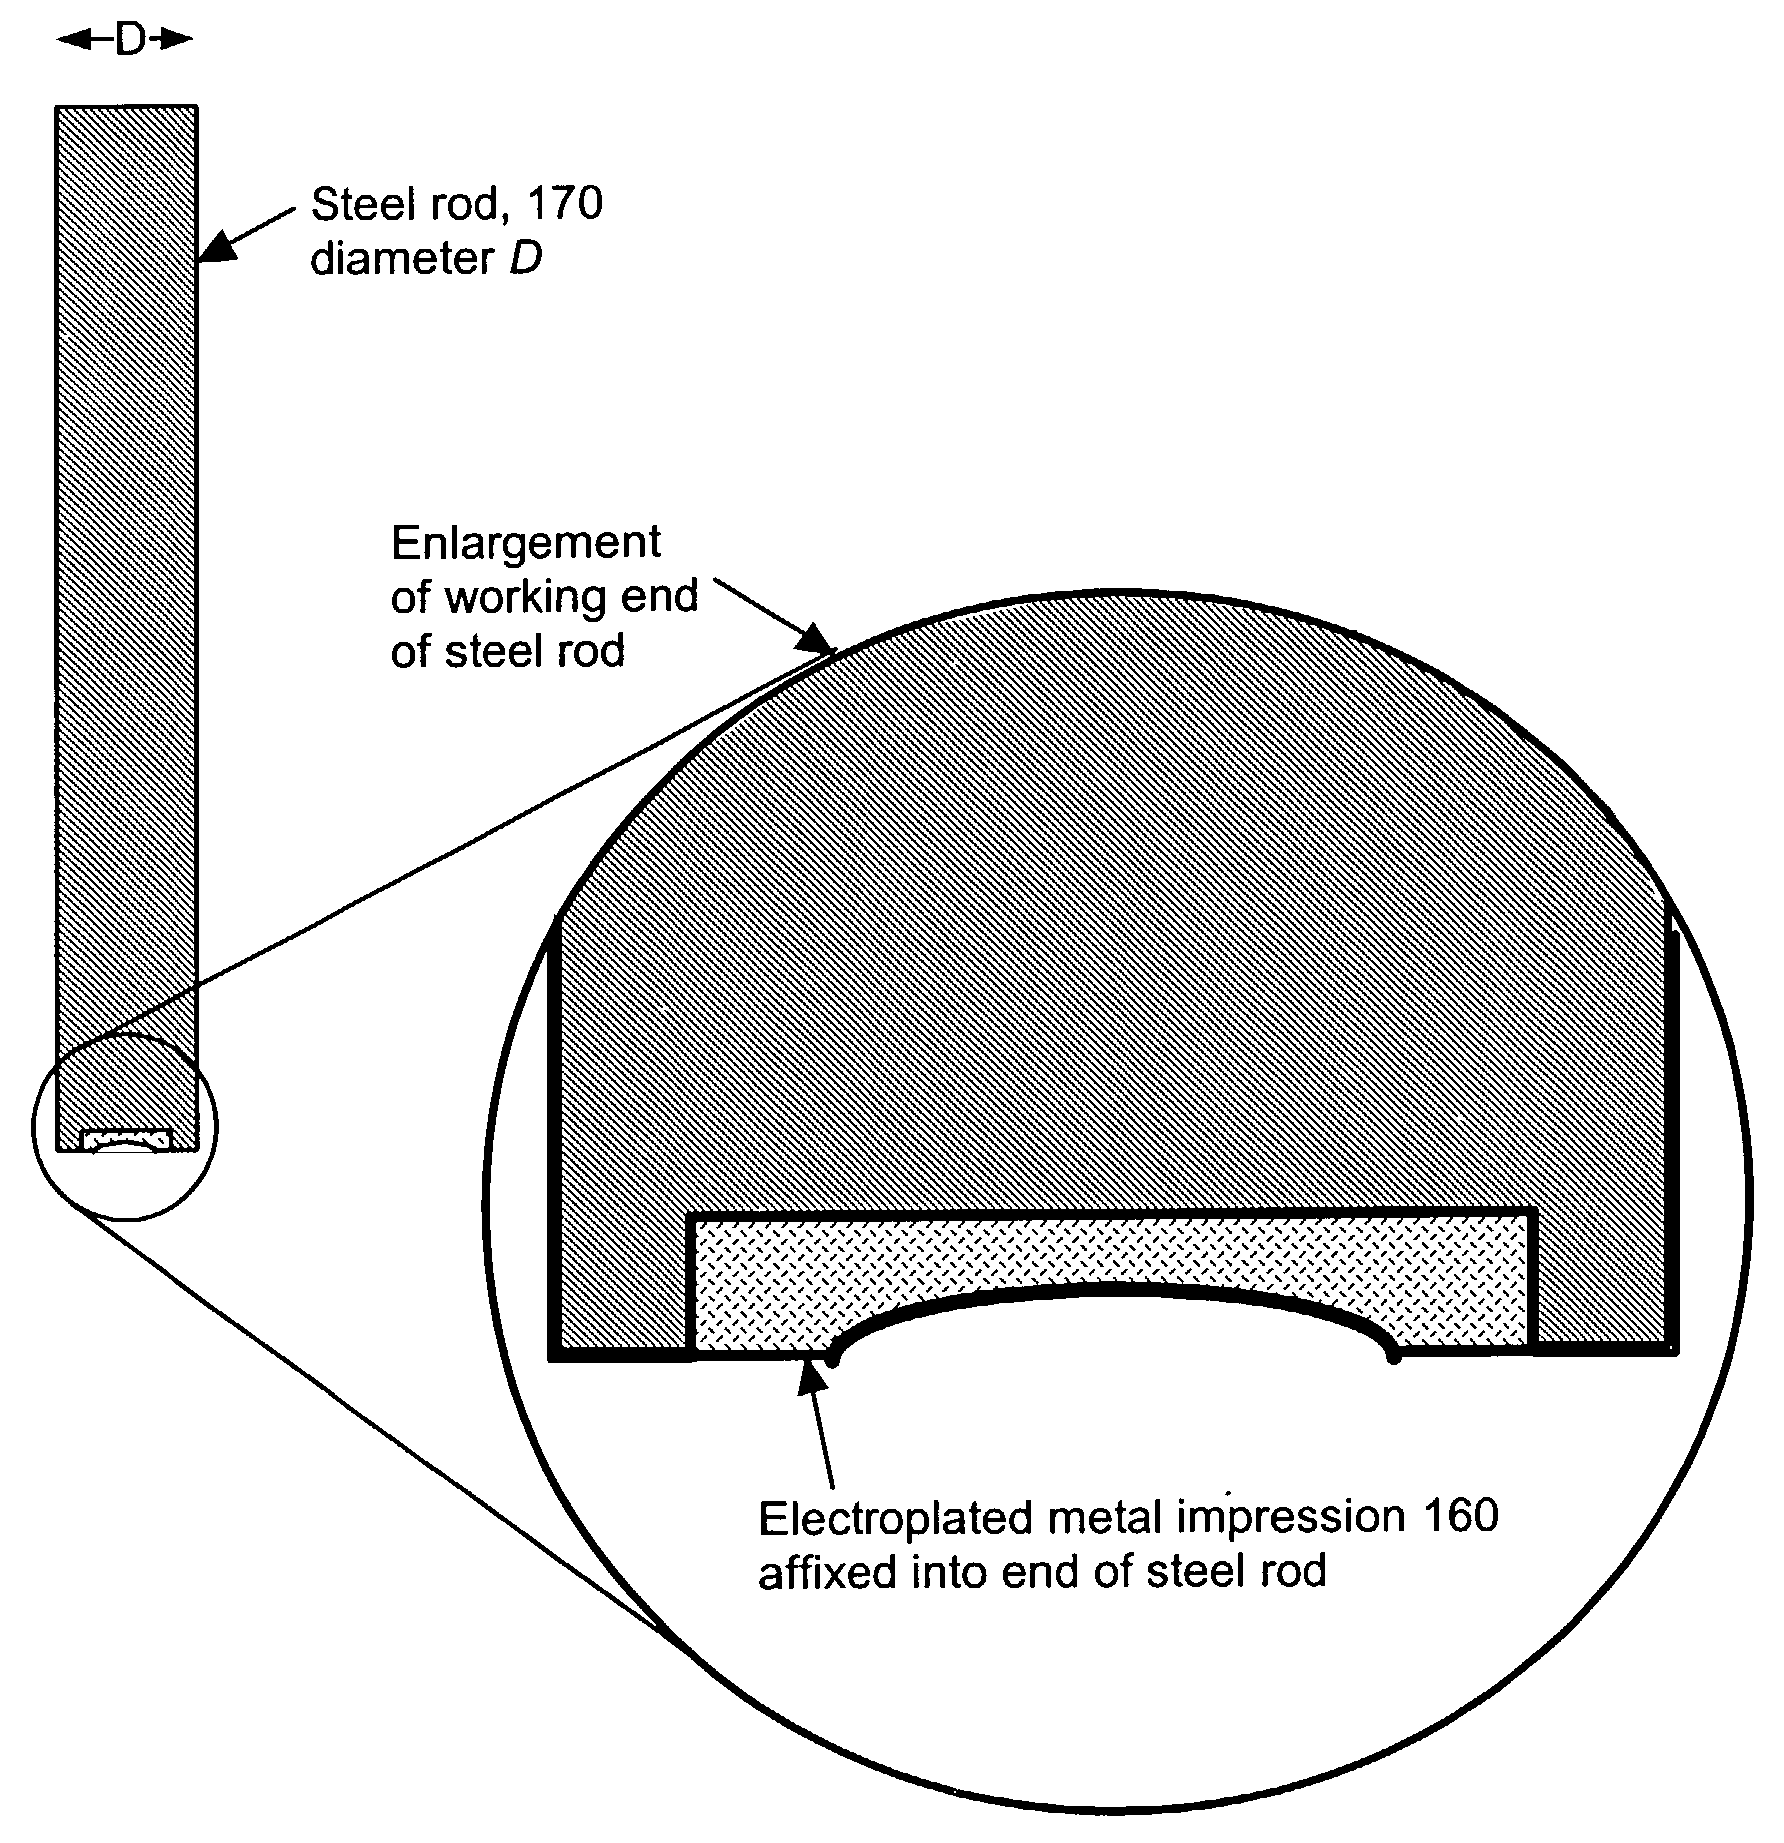 Fabrication of molds and mold components using a photolithographic technique and structures made therefrom